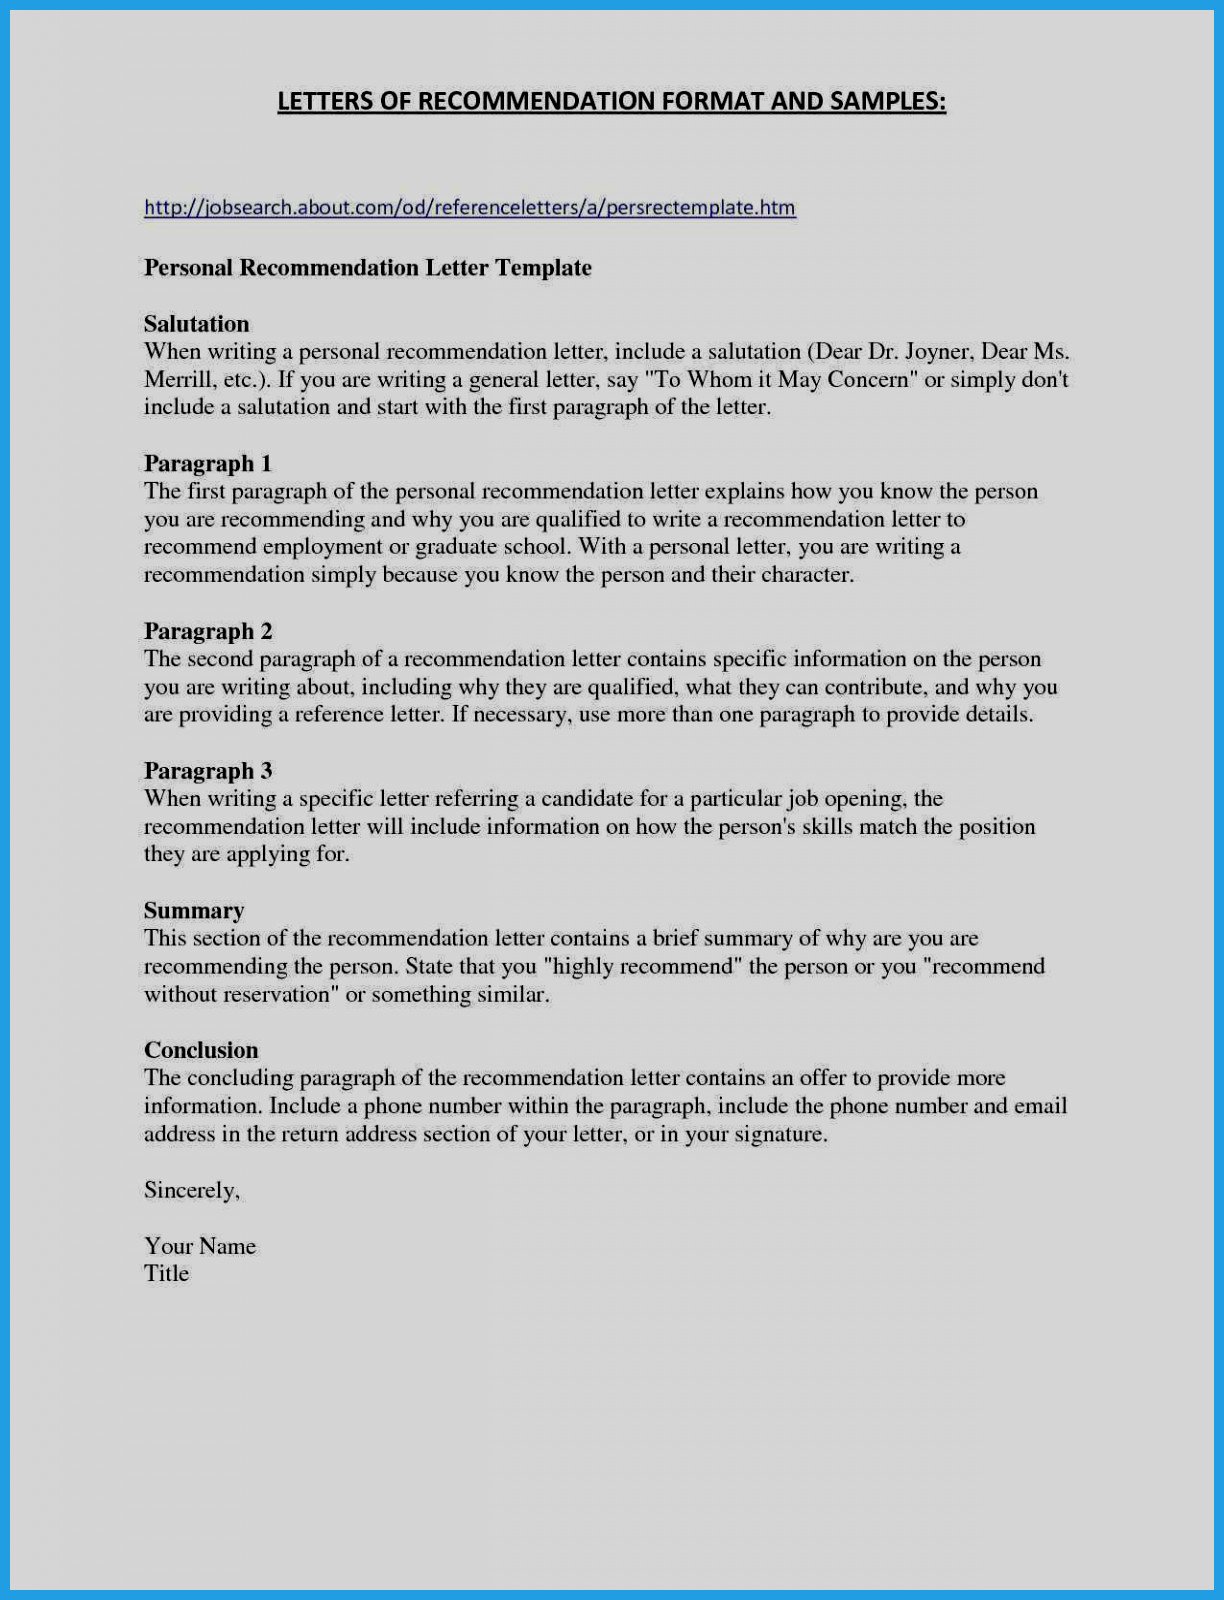 Resume for Letter Of Recommendation Unique Resume Resume for Re Mendation Letter Copy A Resume